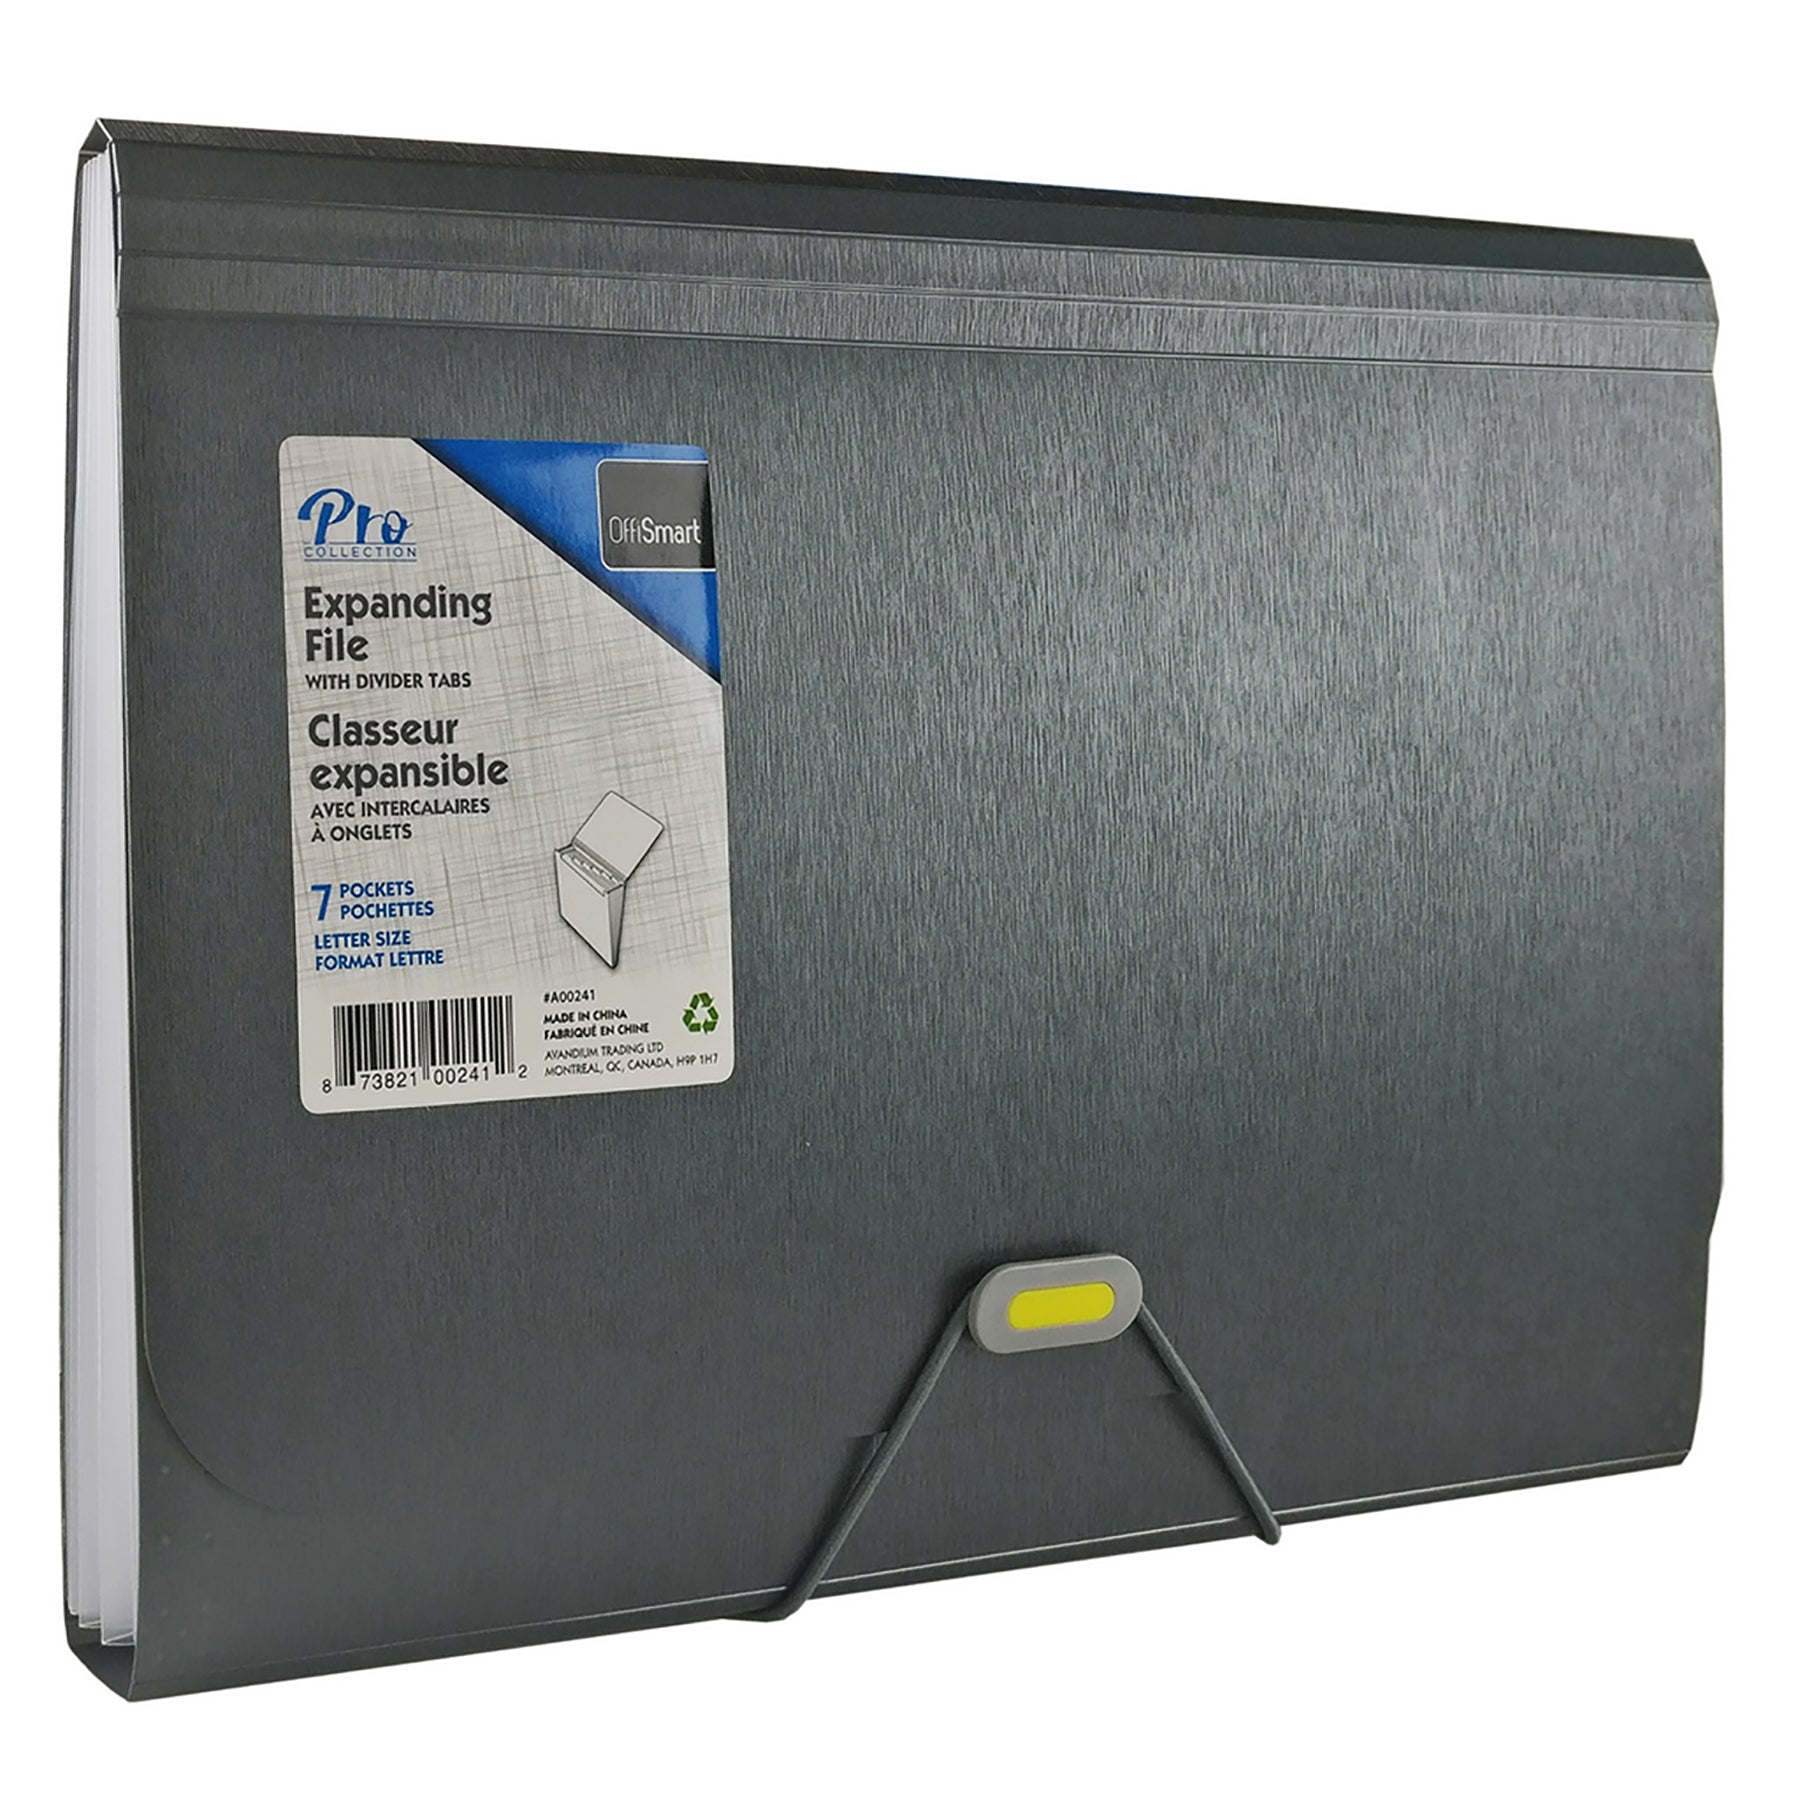 Offismart Expanding File Metallic Charcoal 7 Pockets 13x9.25x1in